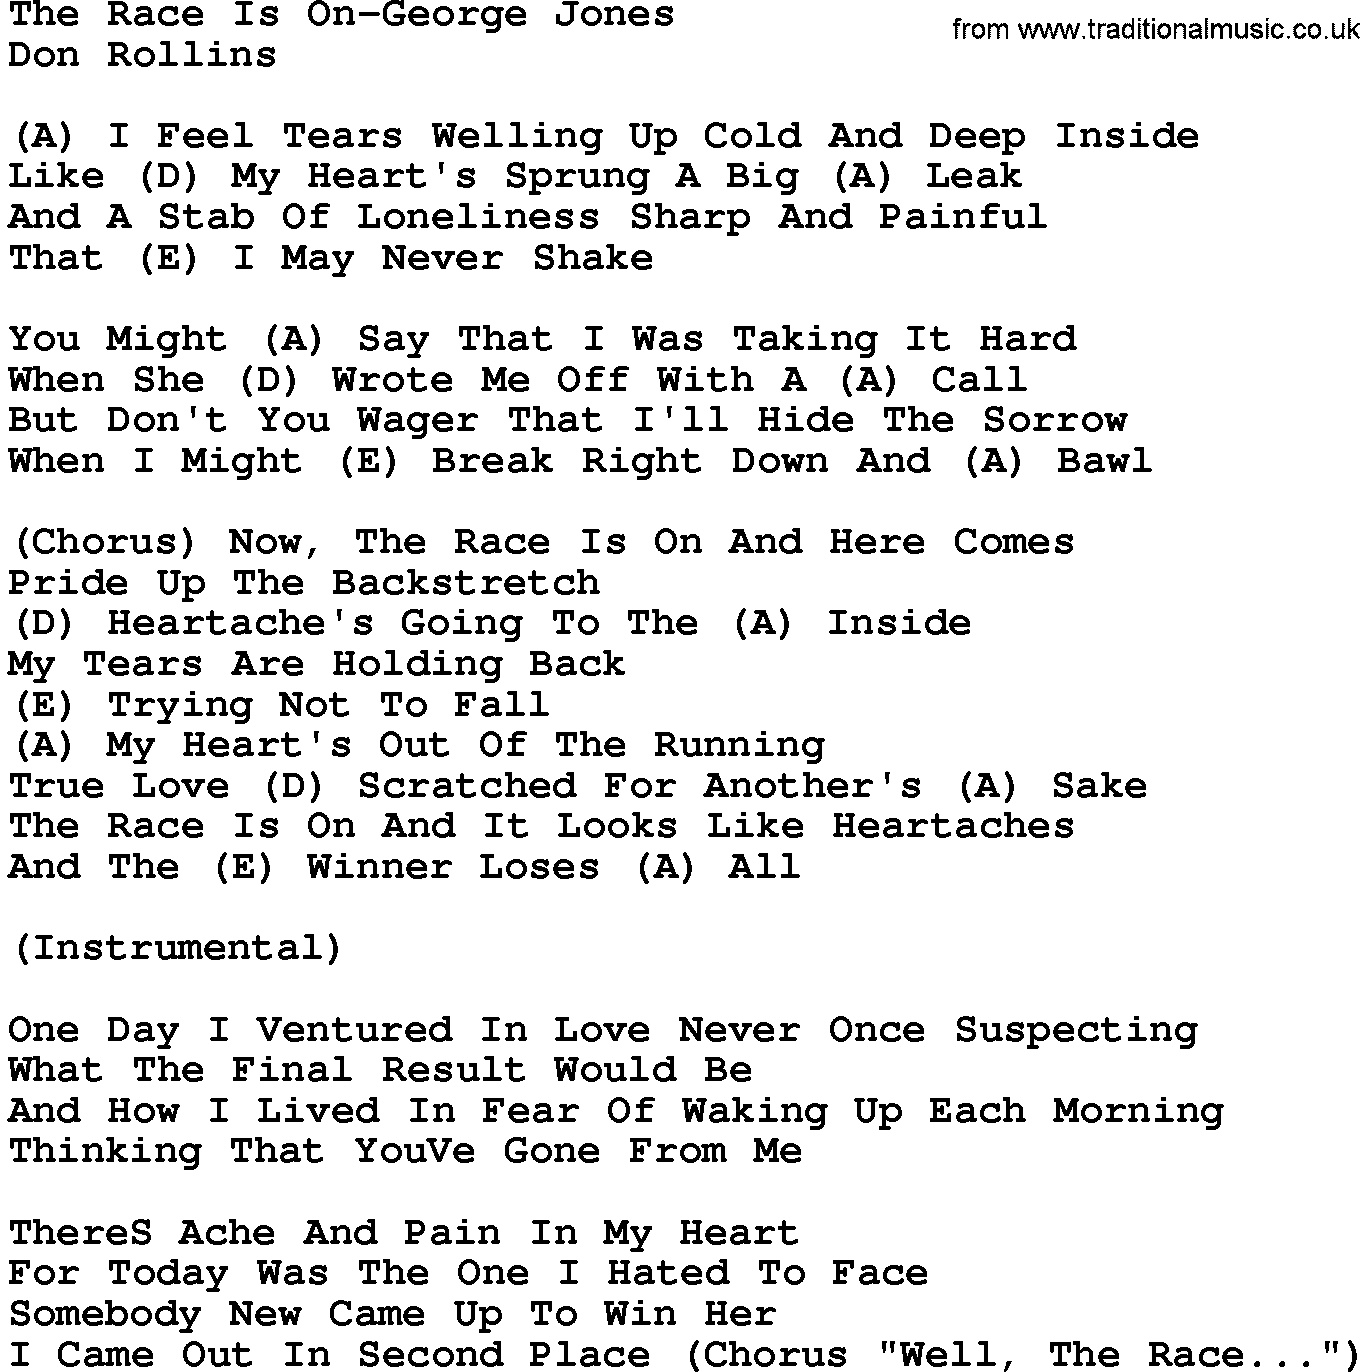 Country music song: The Race Is On-George Jones lyrics and chords